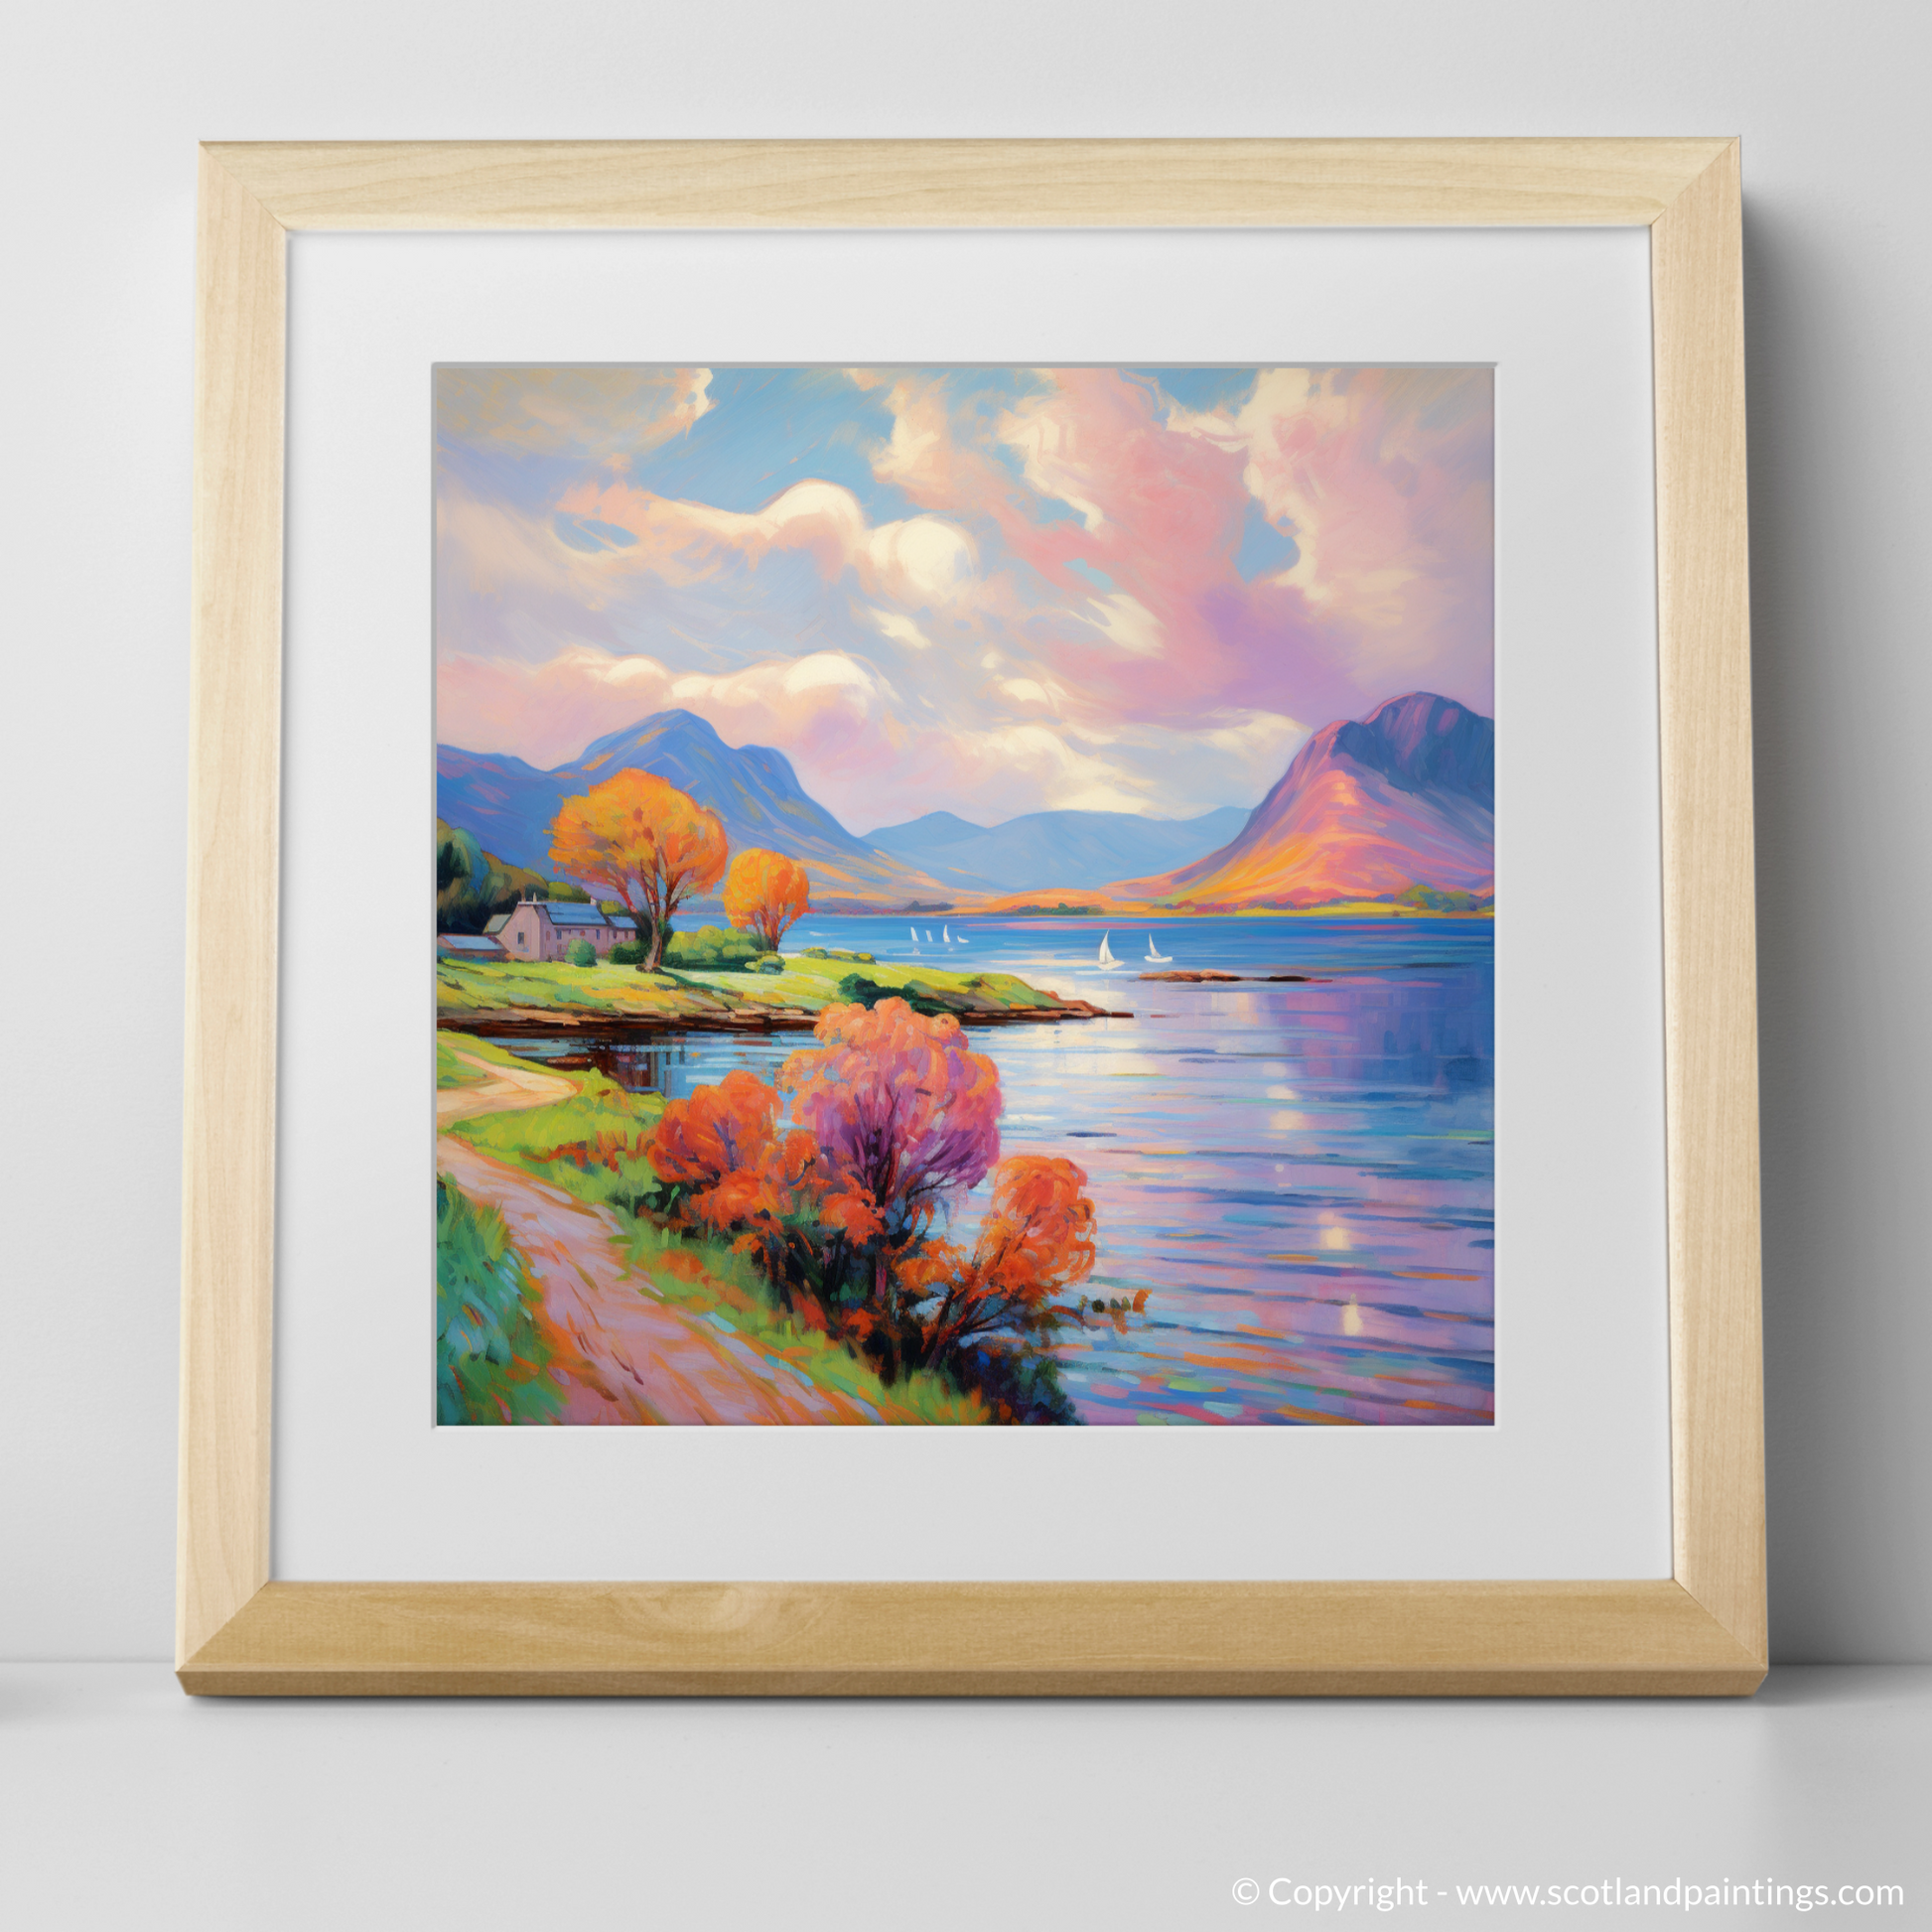 Art Print of Loch Leven, Highlands in summer with a natural frame